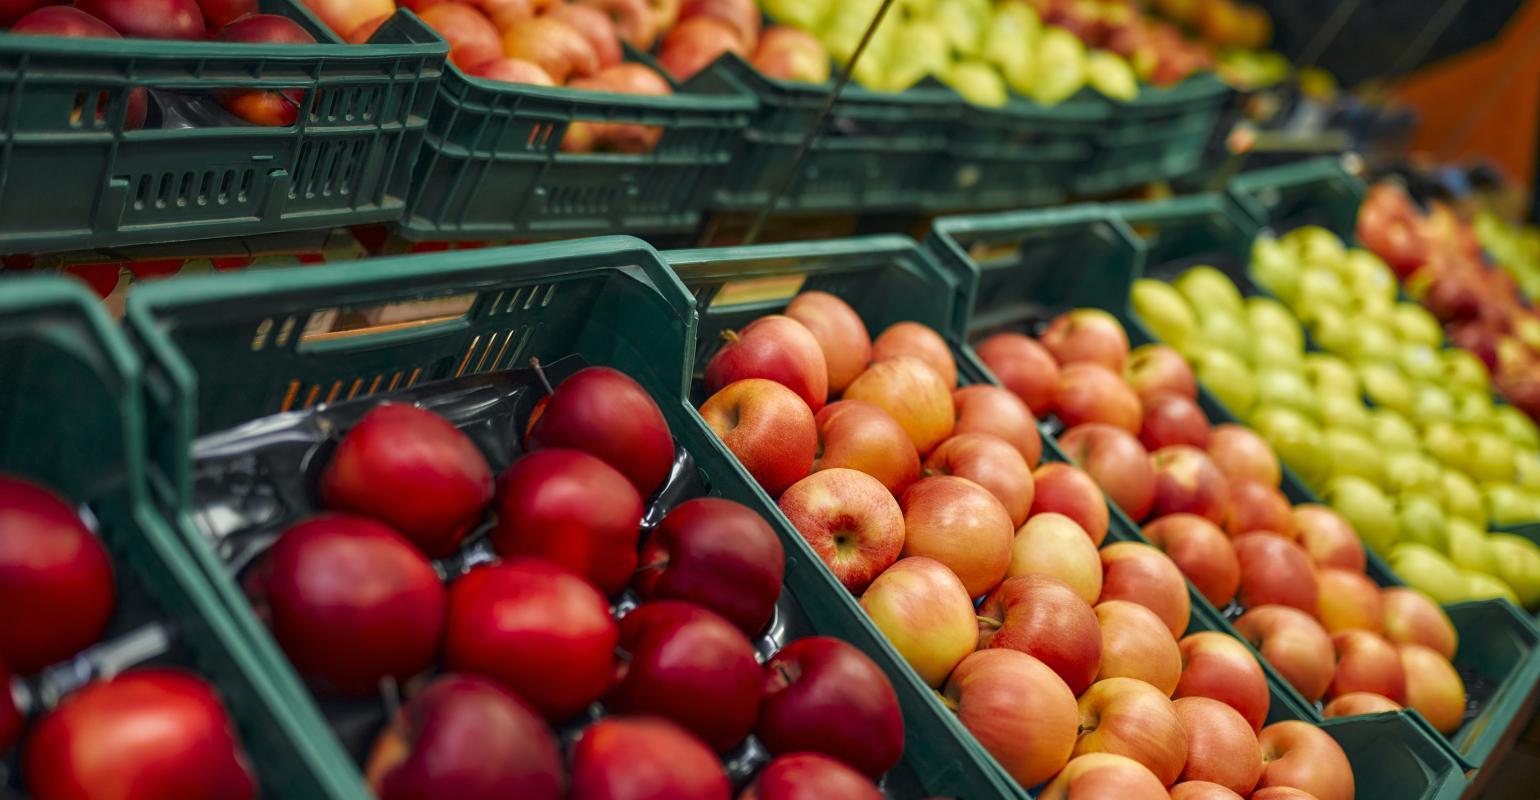 Shoppers want fresh, but grocers don't always agree